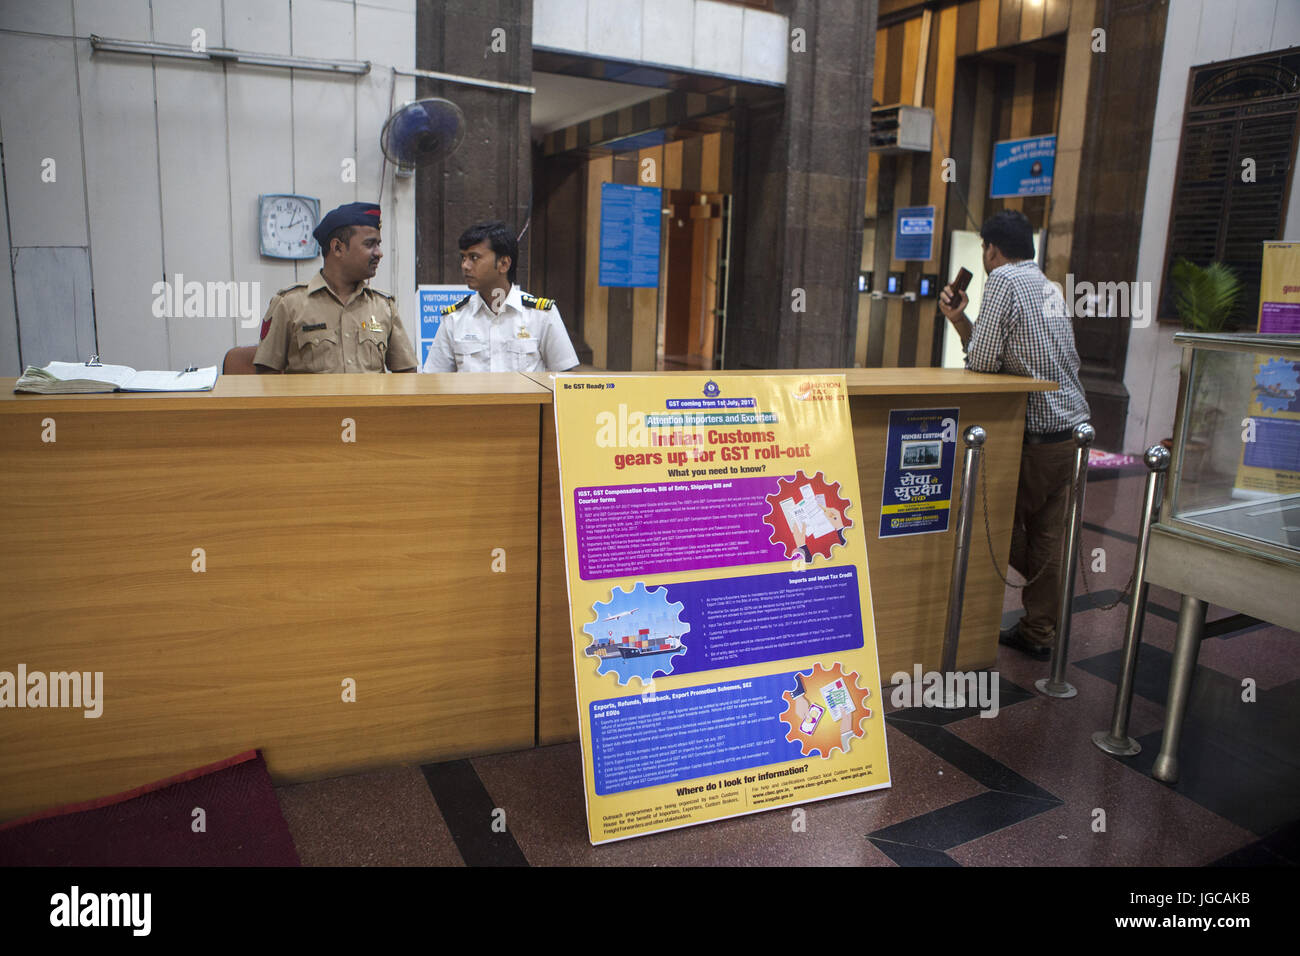 Mumbai, Maharashtra, India. 1st July, 2017. 1 July 2017 : Mumbai - INDIA.A GST poster educating the Public about GST roll out is put up at the Government New Custom House at Mumbai.The new GST tax, designed to replace India's labyrinth of various levies found across the country's states with a uniform system and unite India into a single market, was launched by the country's prime minister Narendra Modi in a special session of parliament in New Delhi at the stroke of midnight 30 June 2017. Credit: Subhash Sharma/ZUMA Wire/Alamy Live News Stock Photo